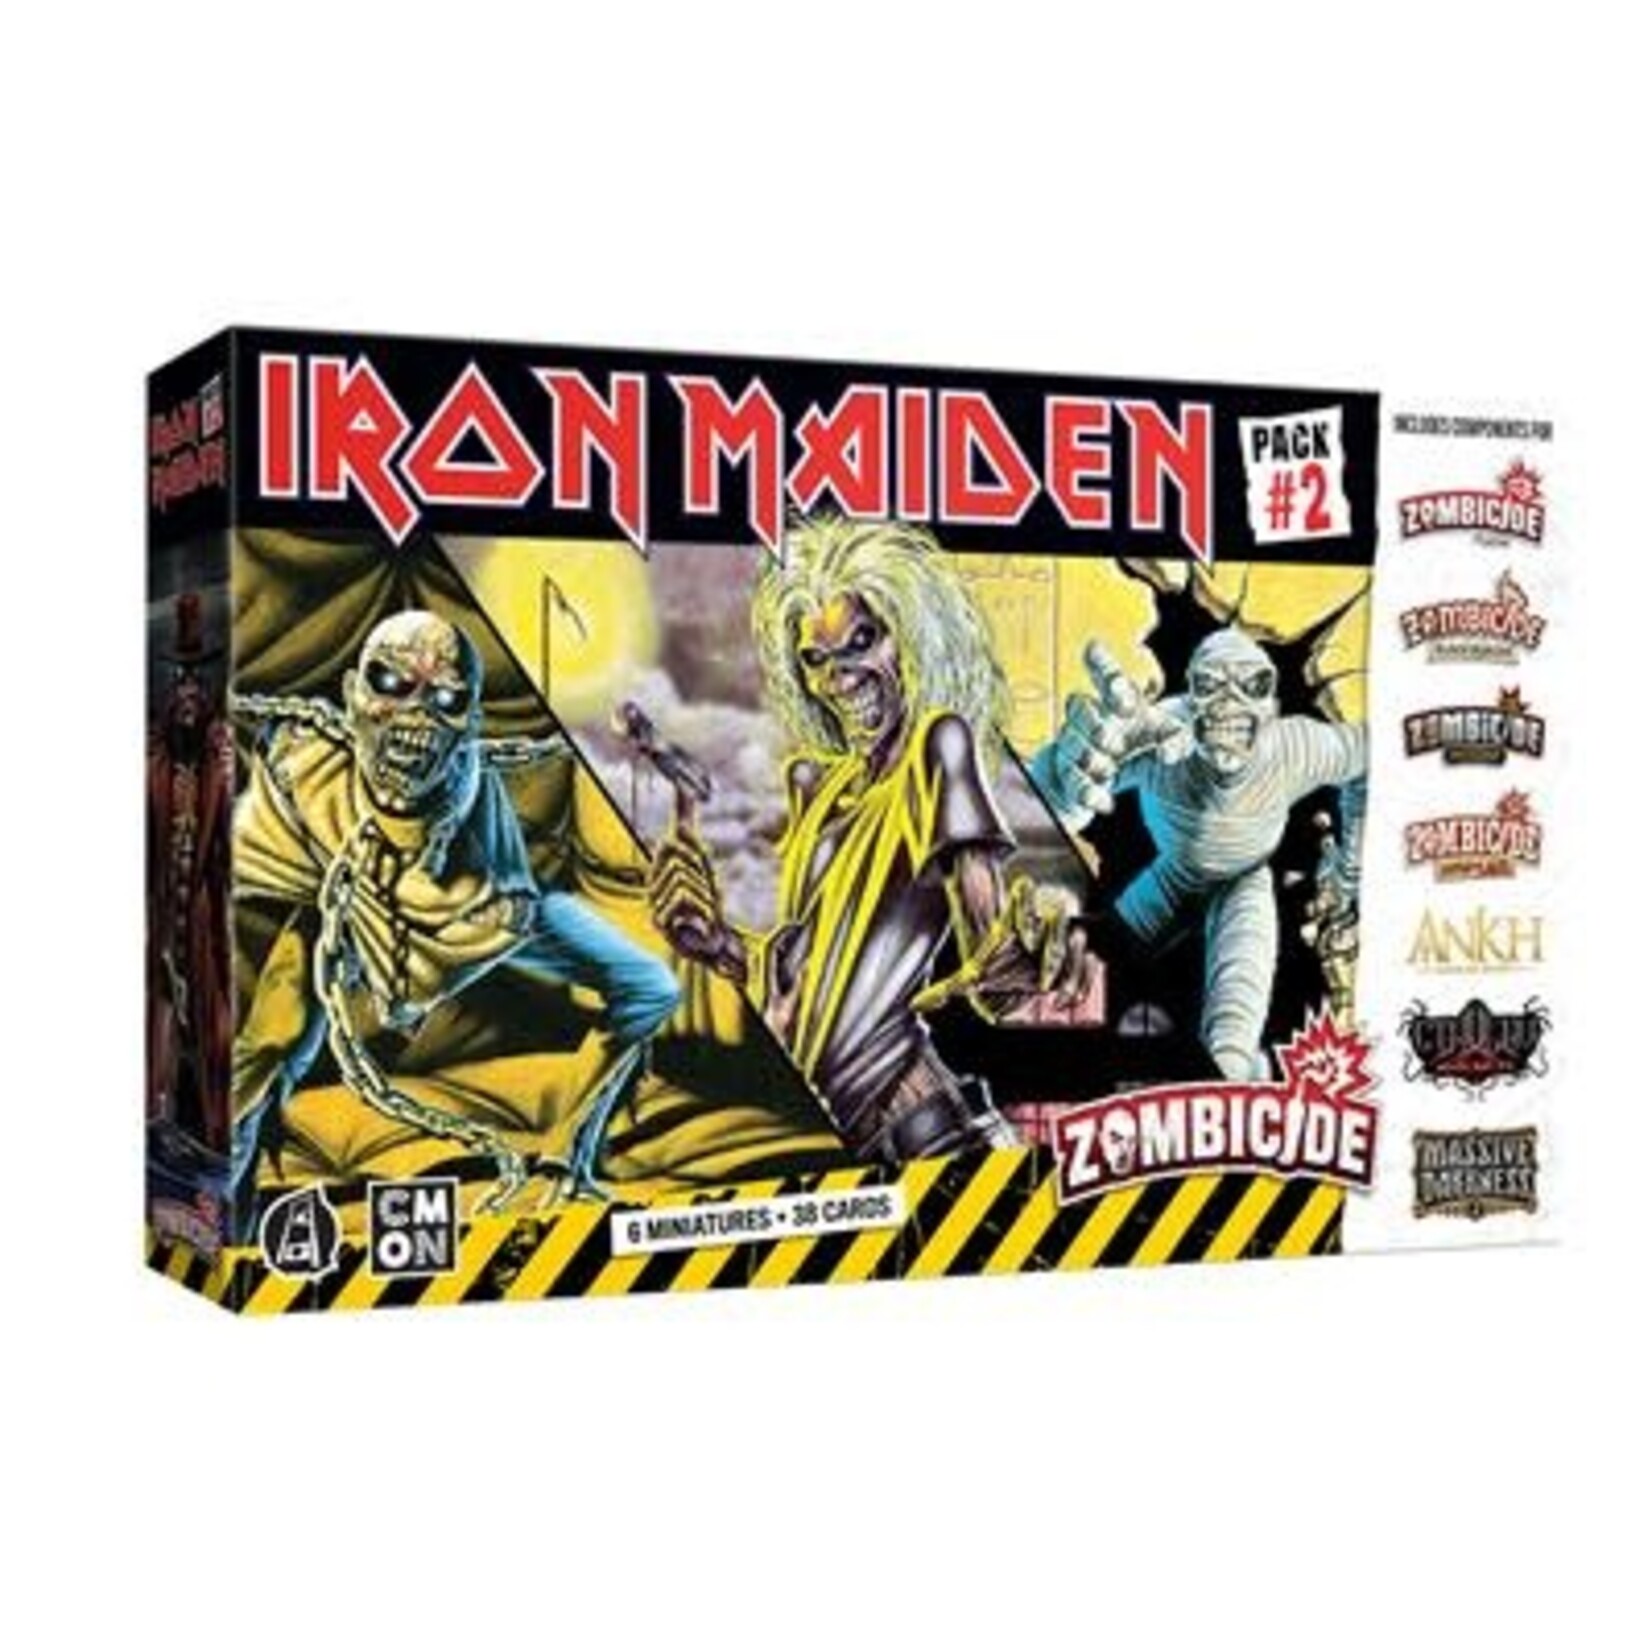 CMON: Cool Mini or Not Zombicide Iron Maiden Pack #2